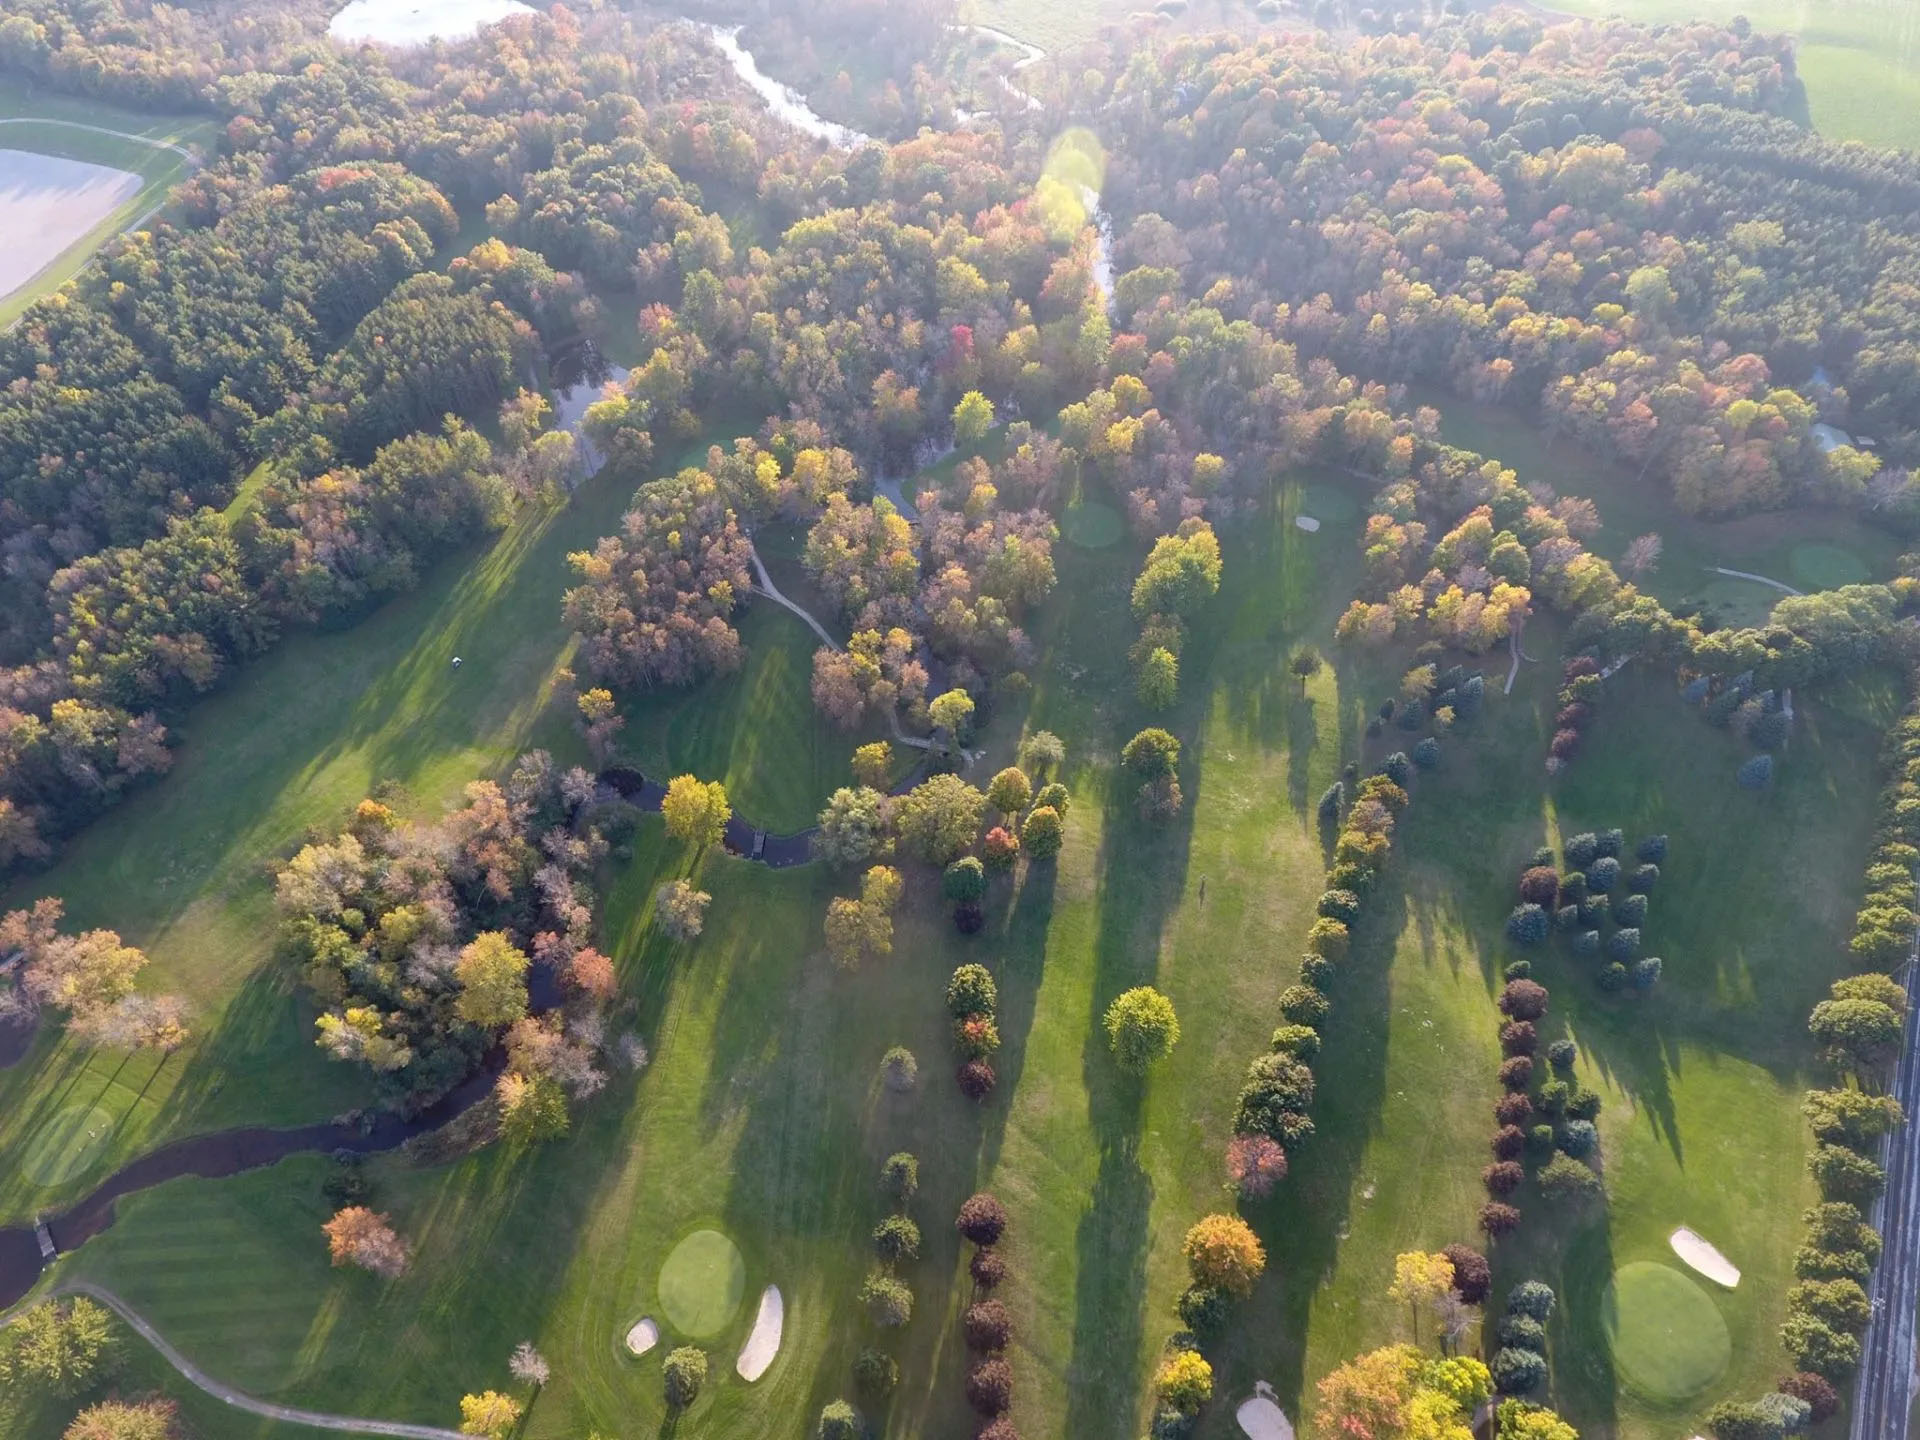 An aerial view of a golf course, showing some greens and surrounding trees